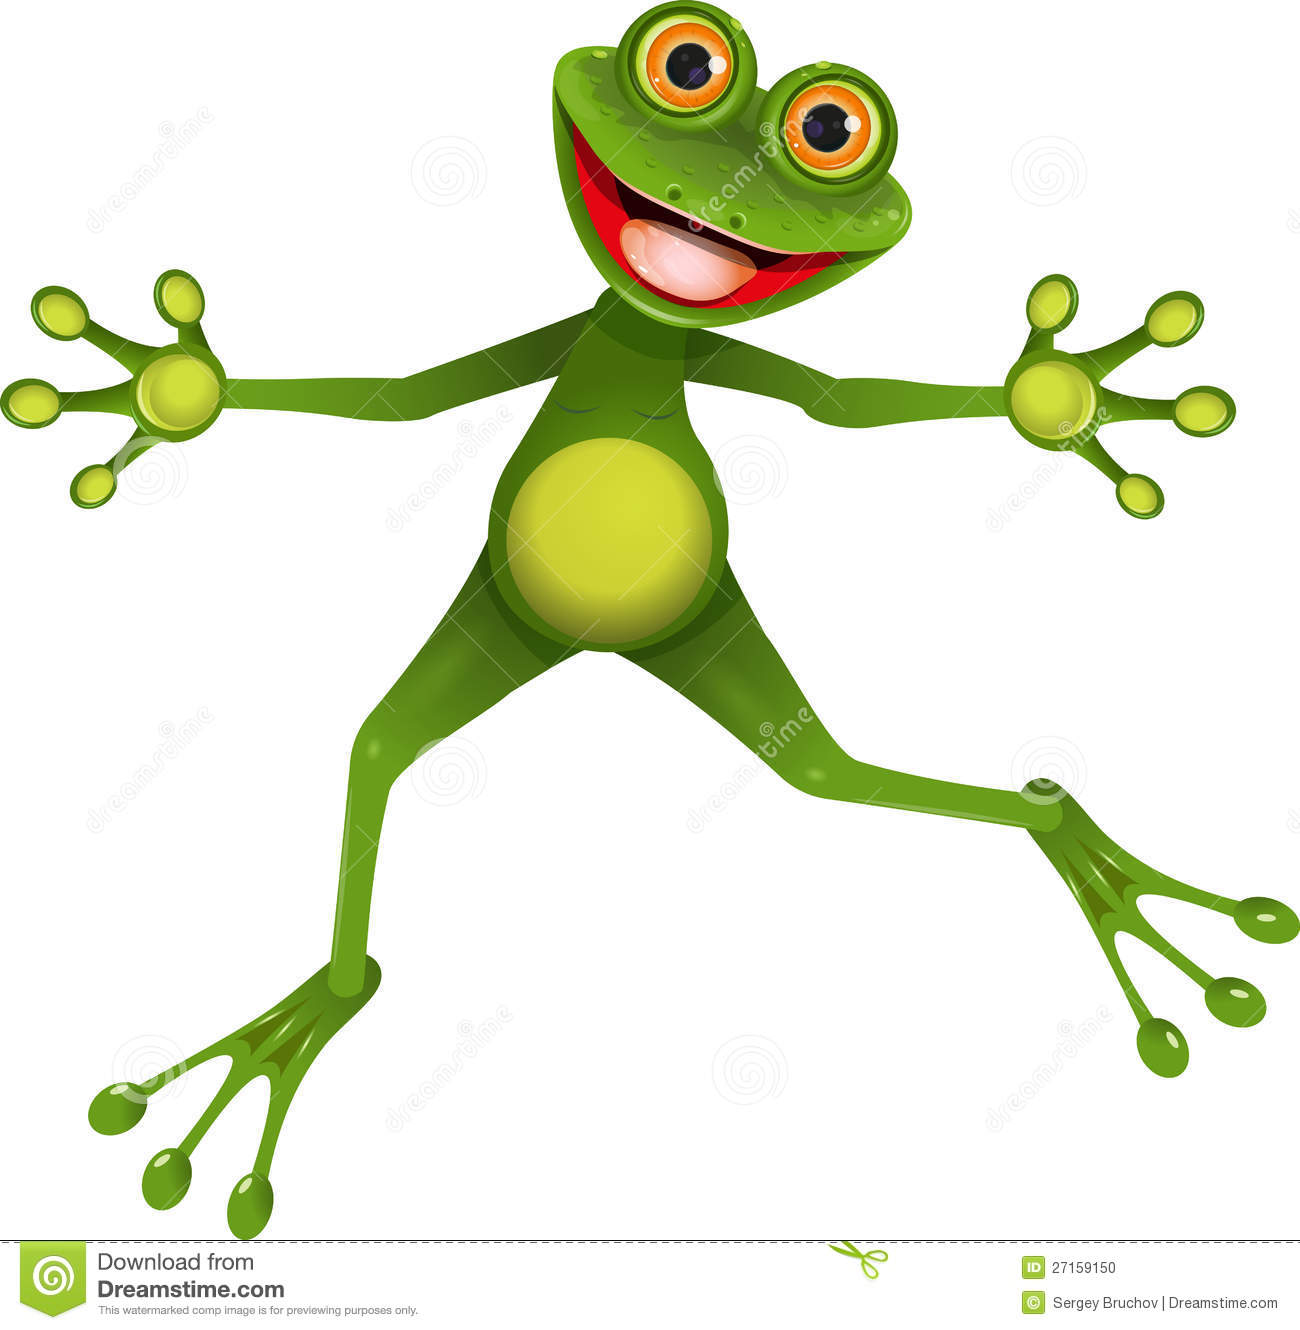 Illustration Merry Green Frog With Greater Eye